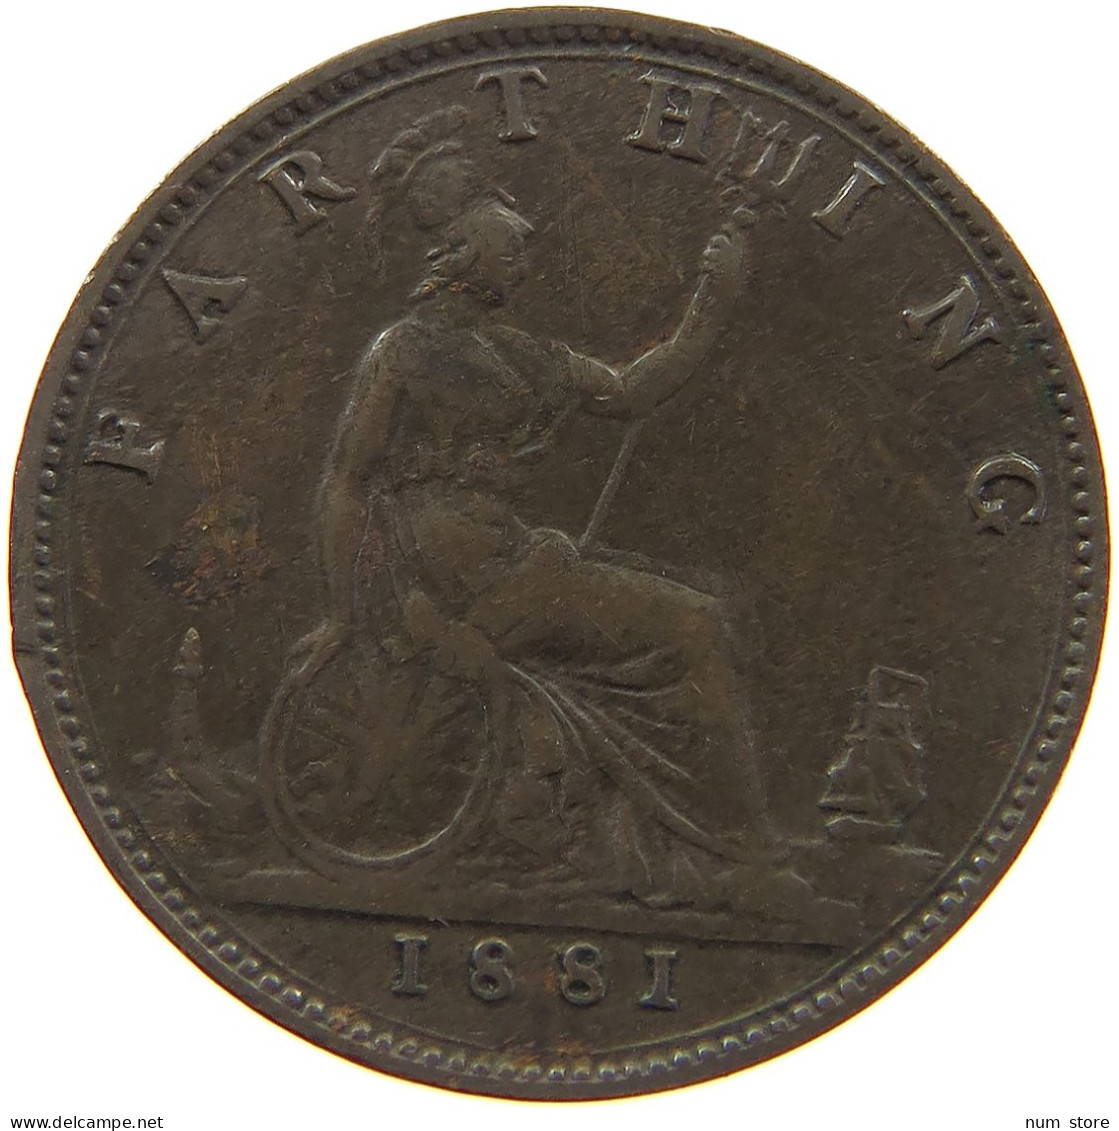 GREAT BRITAIN FARTHING 1881 Victoria 1837-1901 #a011 0777 - B. 1 Farthing